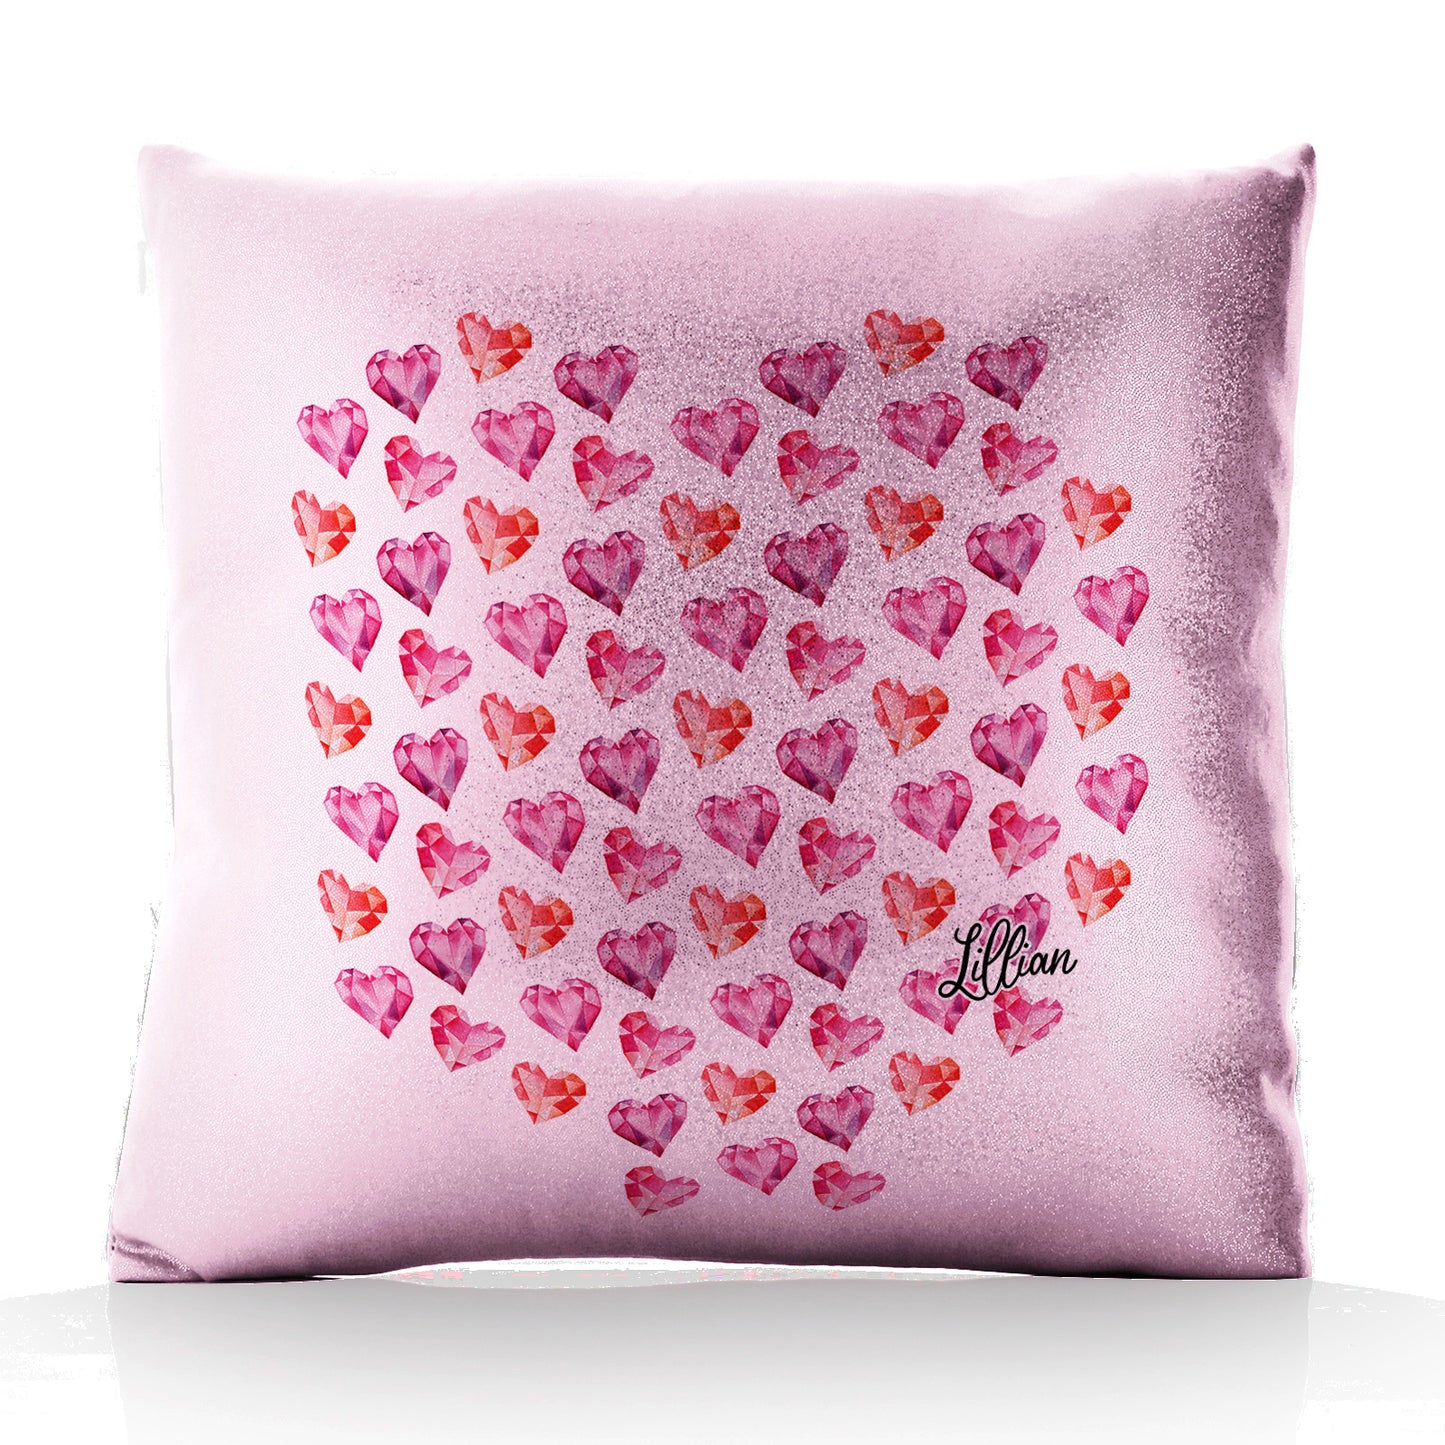 Personalised Glitter Cushion with Stylish Text and Crystal Hearts Print